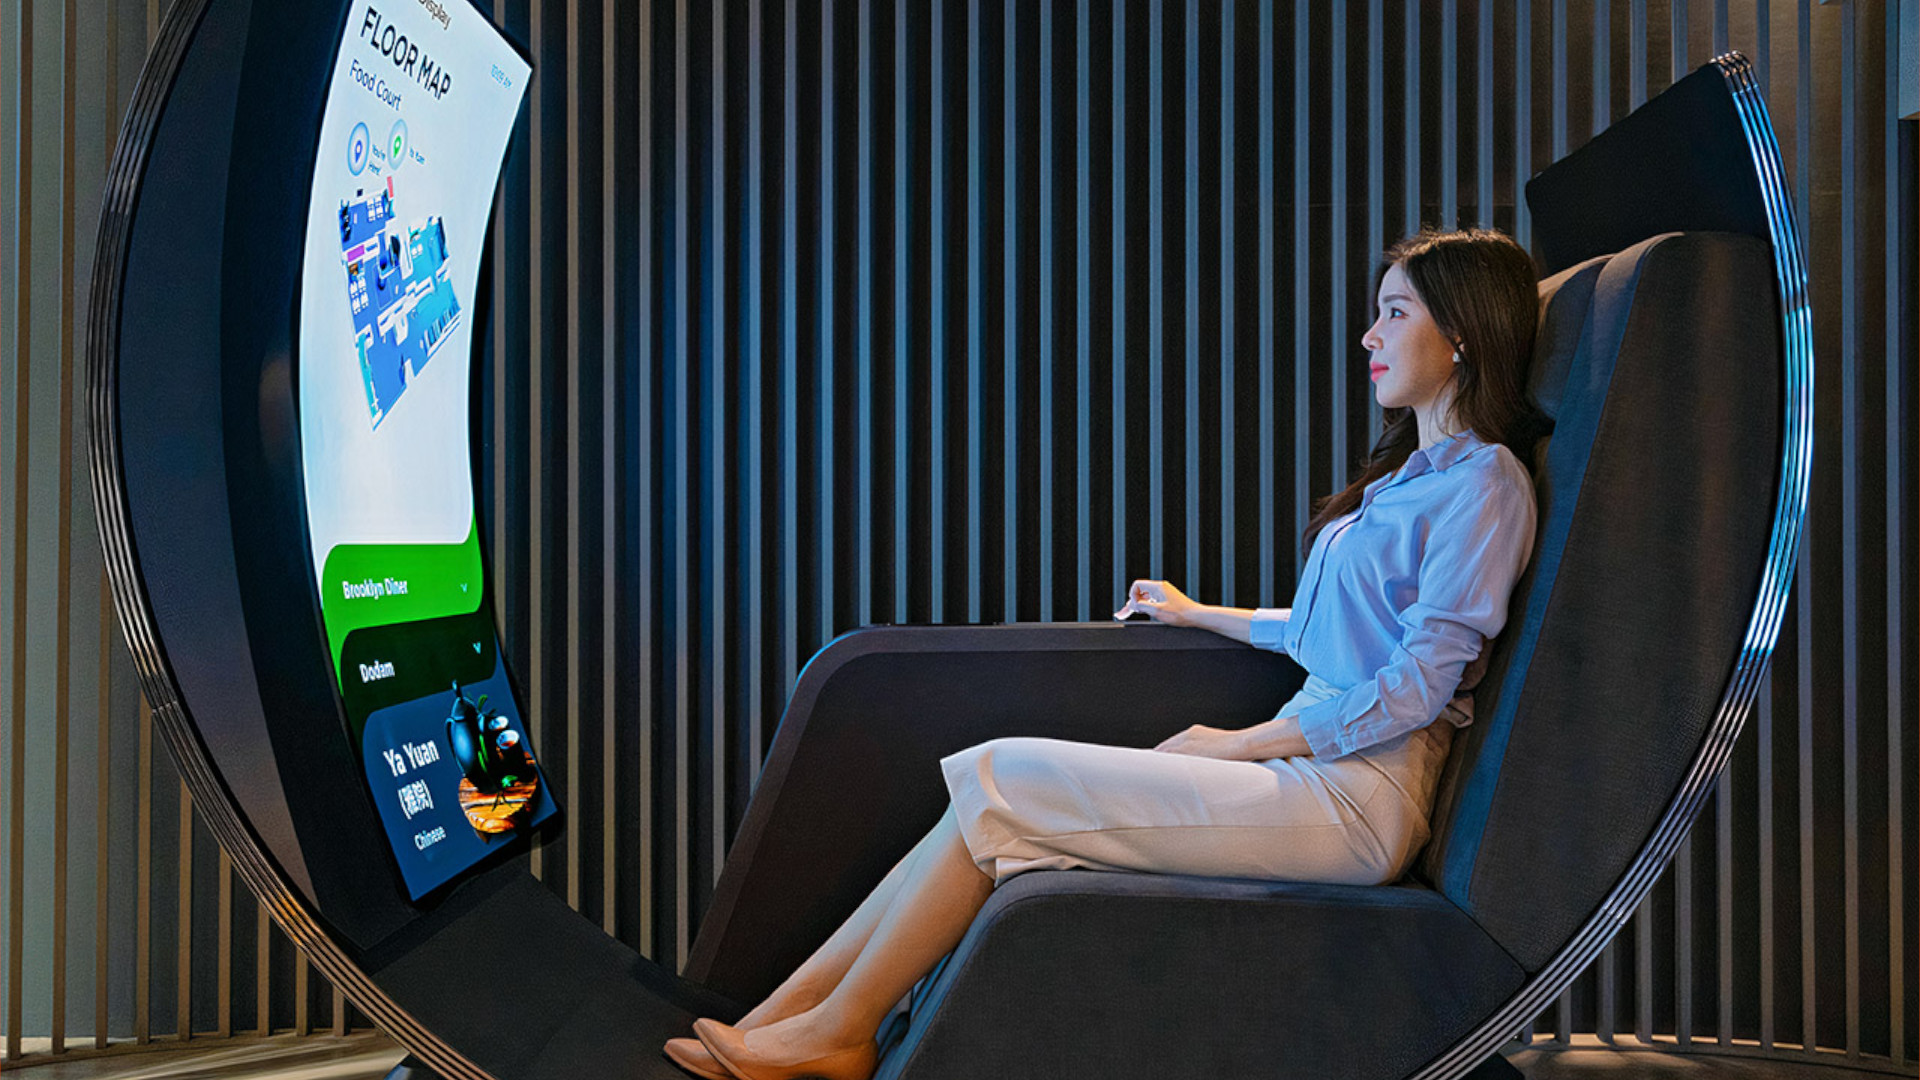 LG put a flexible OLED panel on a rotating chair and it looks like a great gaming setup